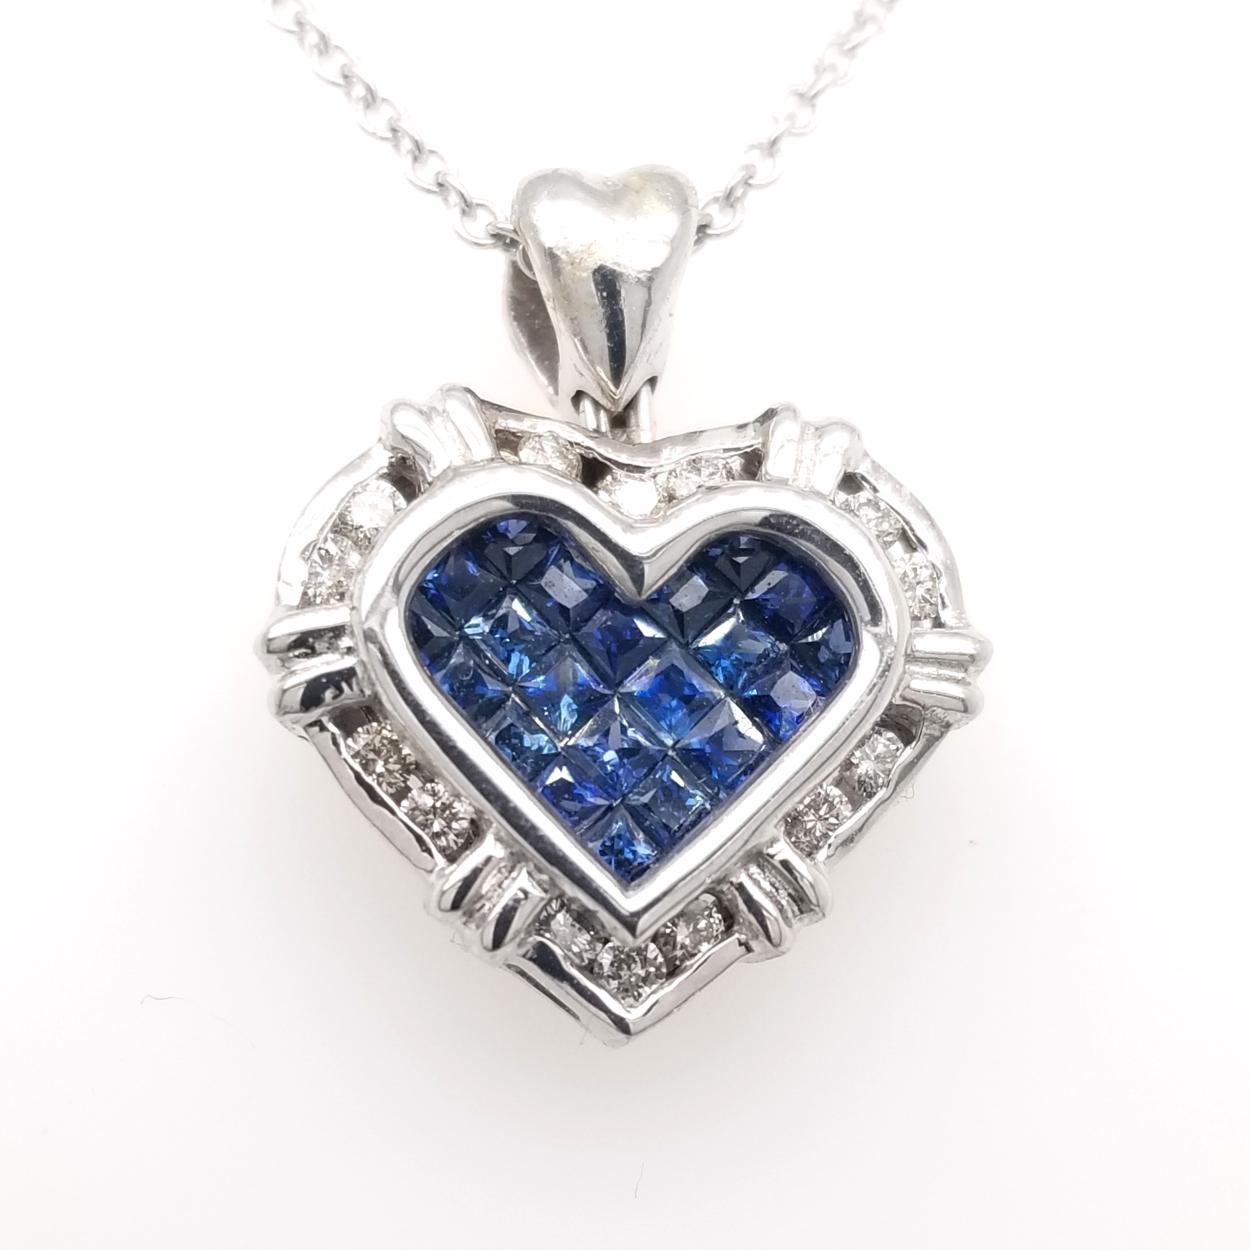 18K Gold Heart shaped Pendant with 21 Invisible Set Princess Cut Blue Sapphires (Total Gem Weight 0.75 Ct) surrounded by a Channel set Halo of diamonds with total weight of 0.24 Ct. 
Total Diamond Weight: 0.24 Ct
Total Gem Weight: 0.75 Ct
Total